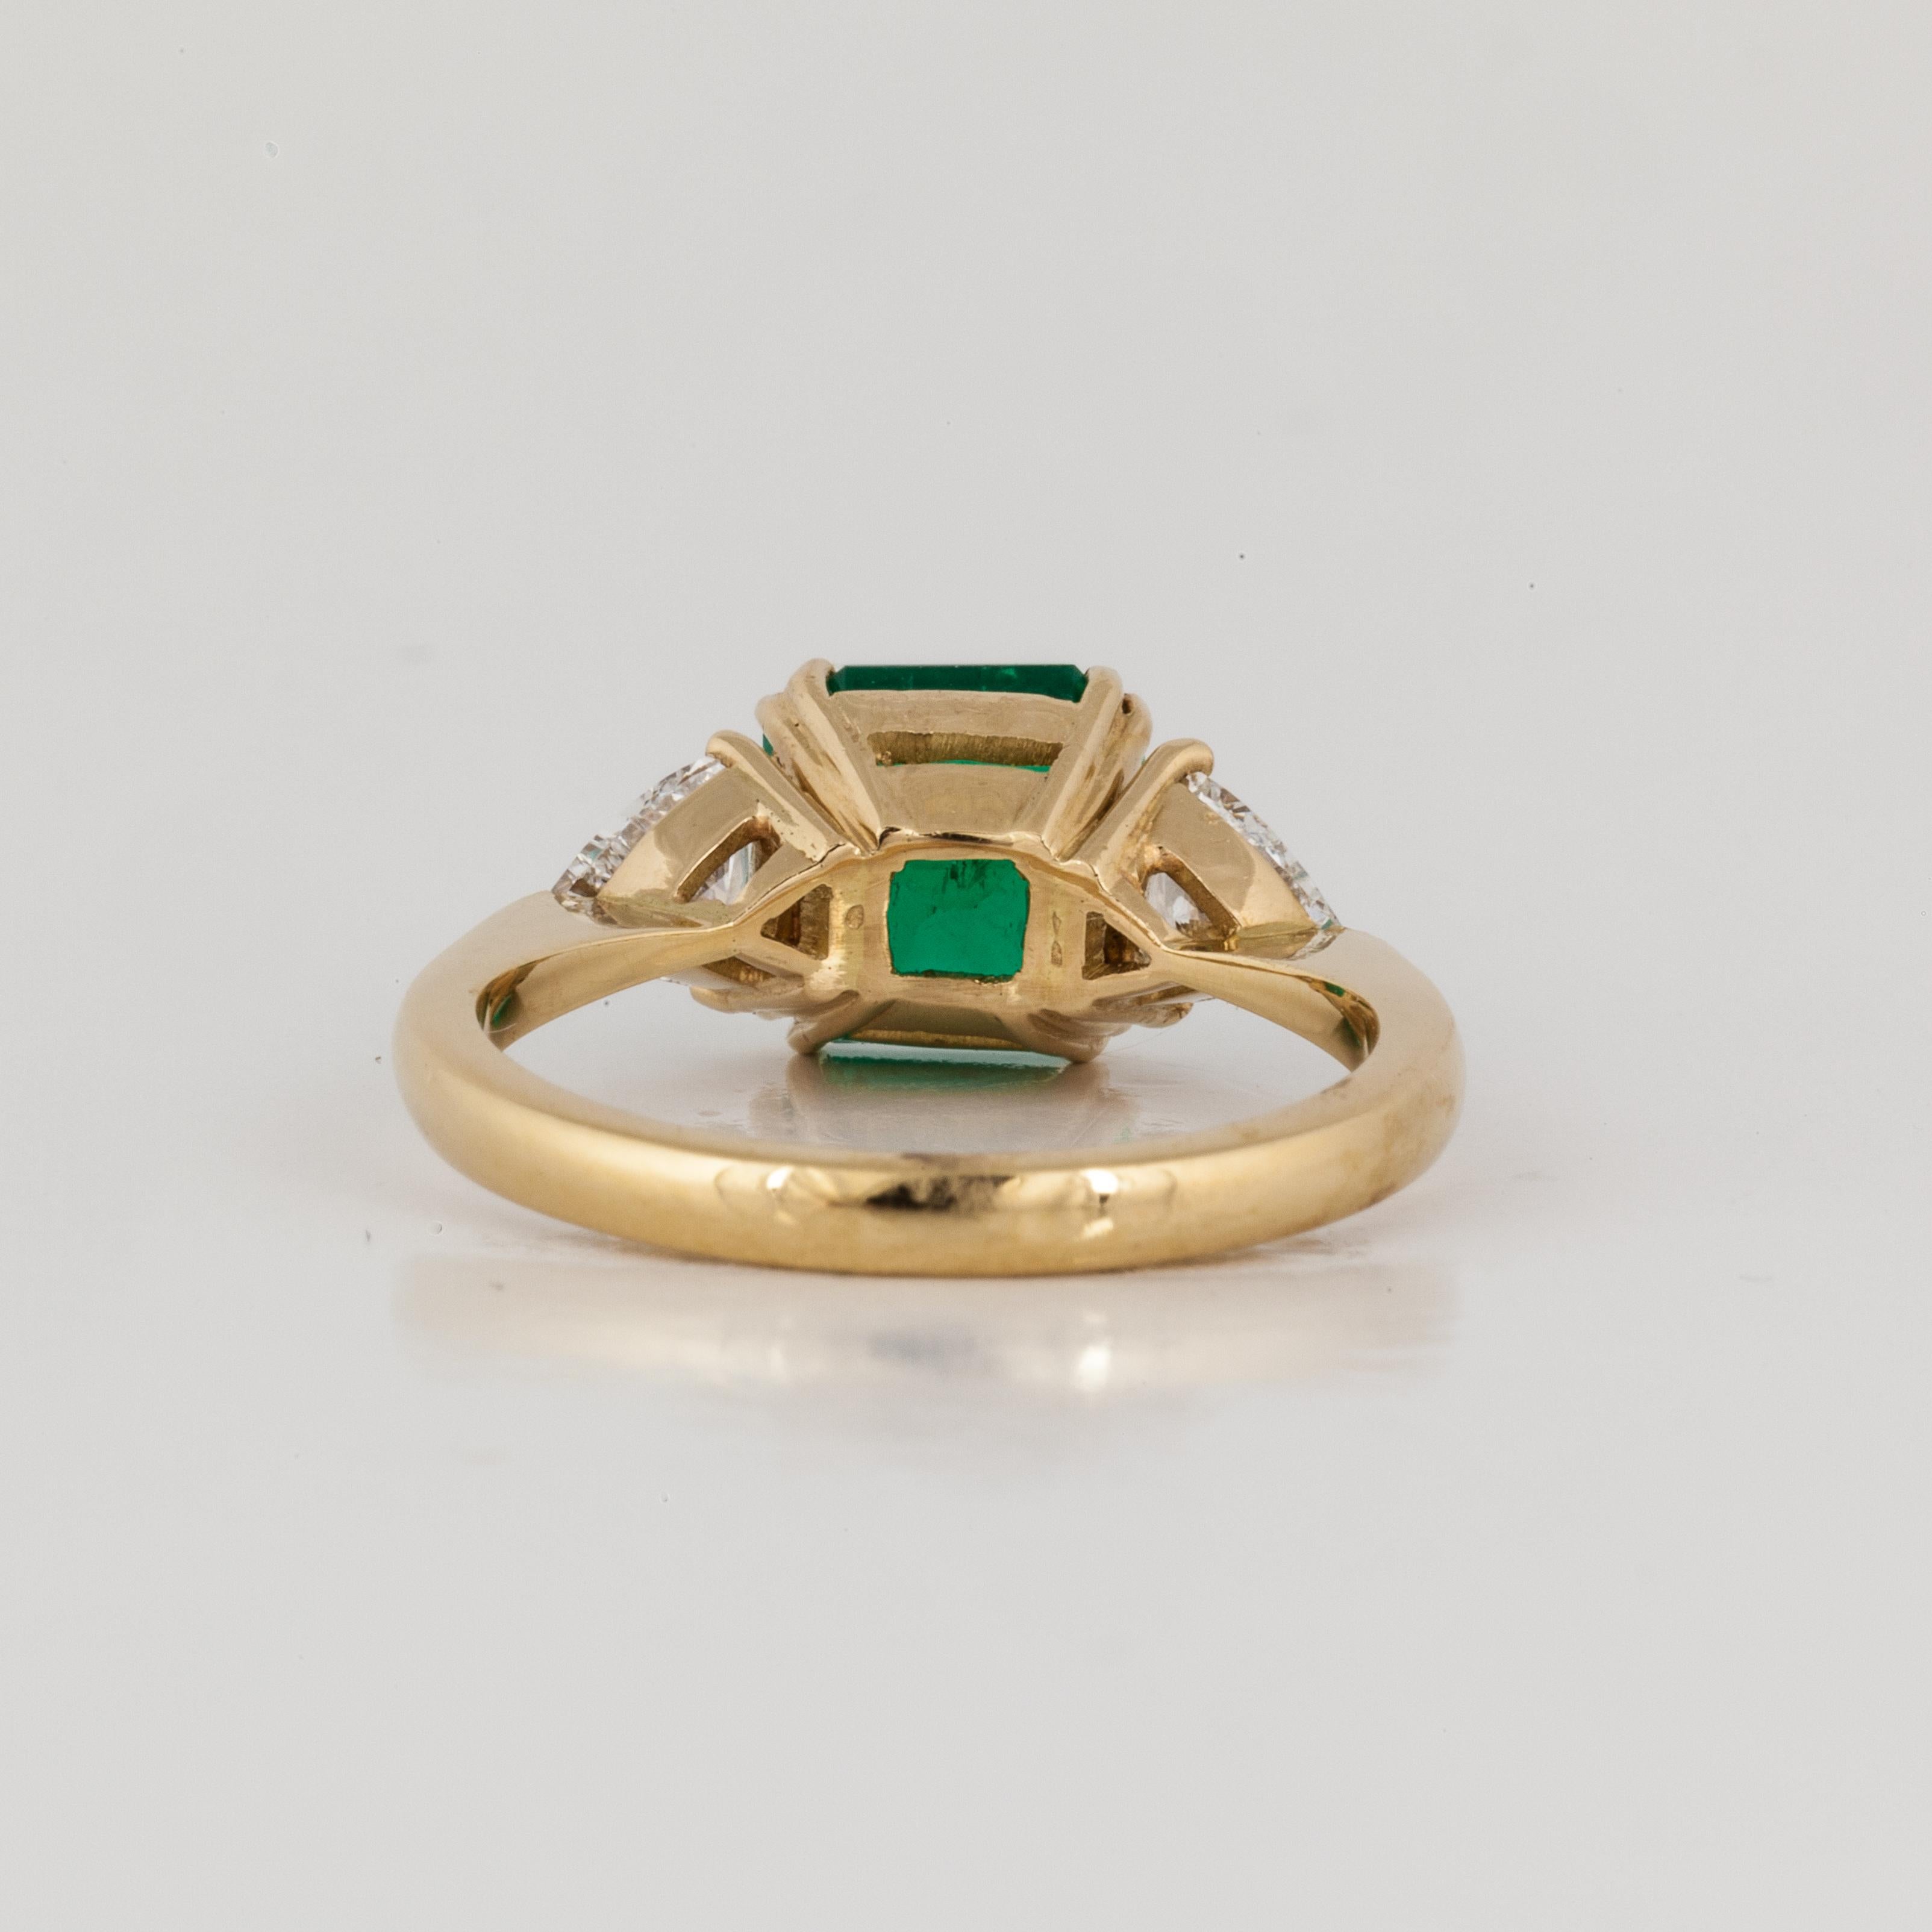 AGL Certified 2.30 Ct. Emerald and Diamond Ring in 18K Gold In Good Condition For Sale In Houston, TX